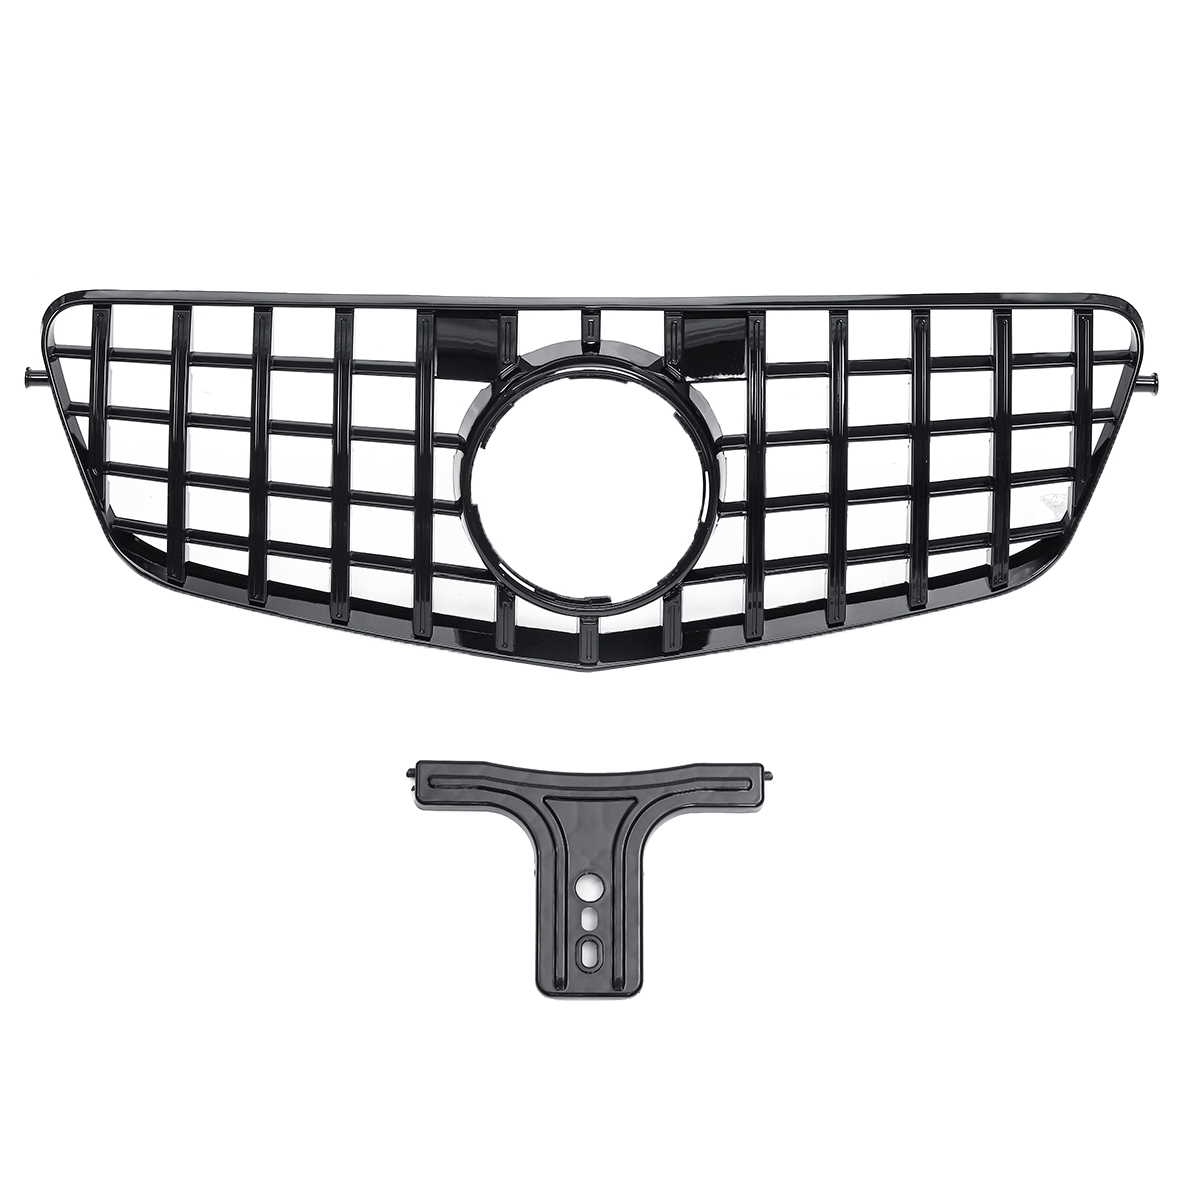 New Gt Style Front Hood Grille Grill For Mercedes Benz E Class 10 13